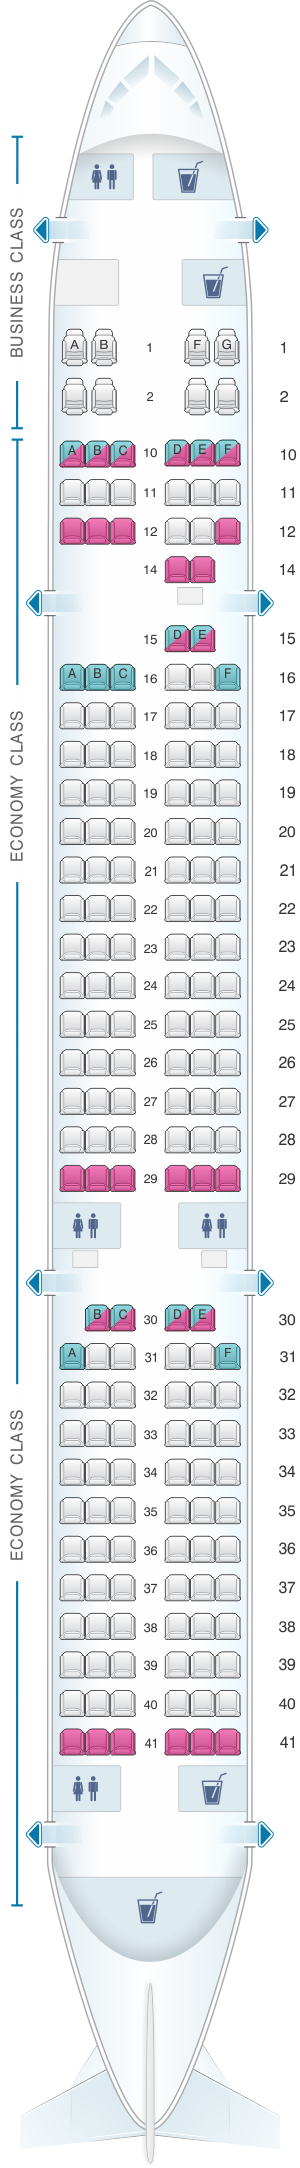 Seat map for Transaero Airlines Tupolev 214